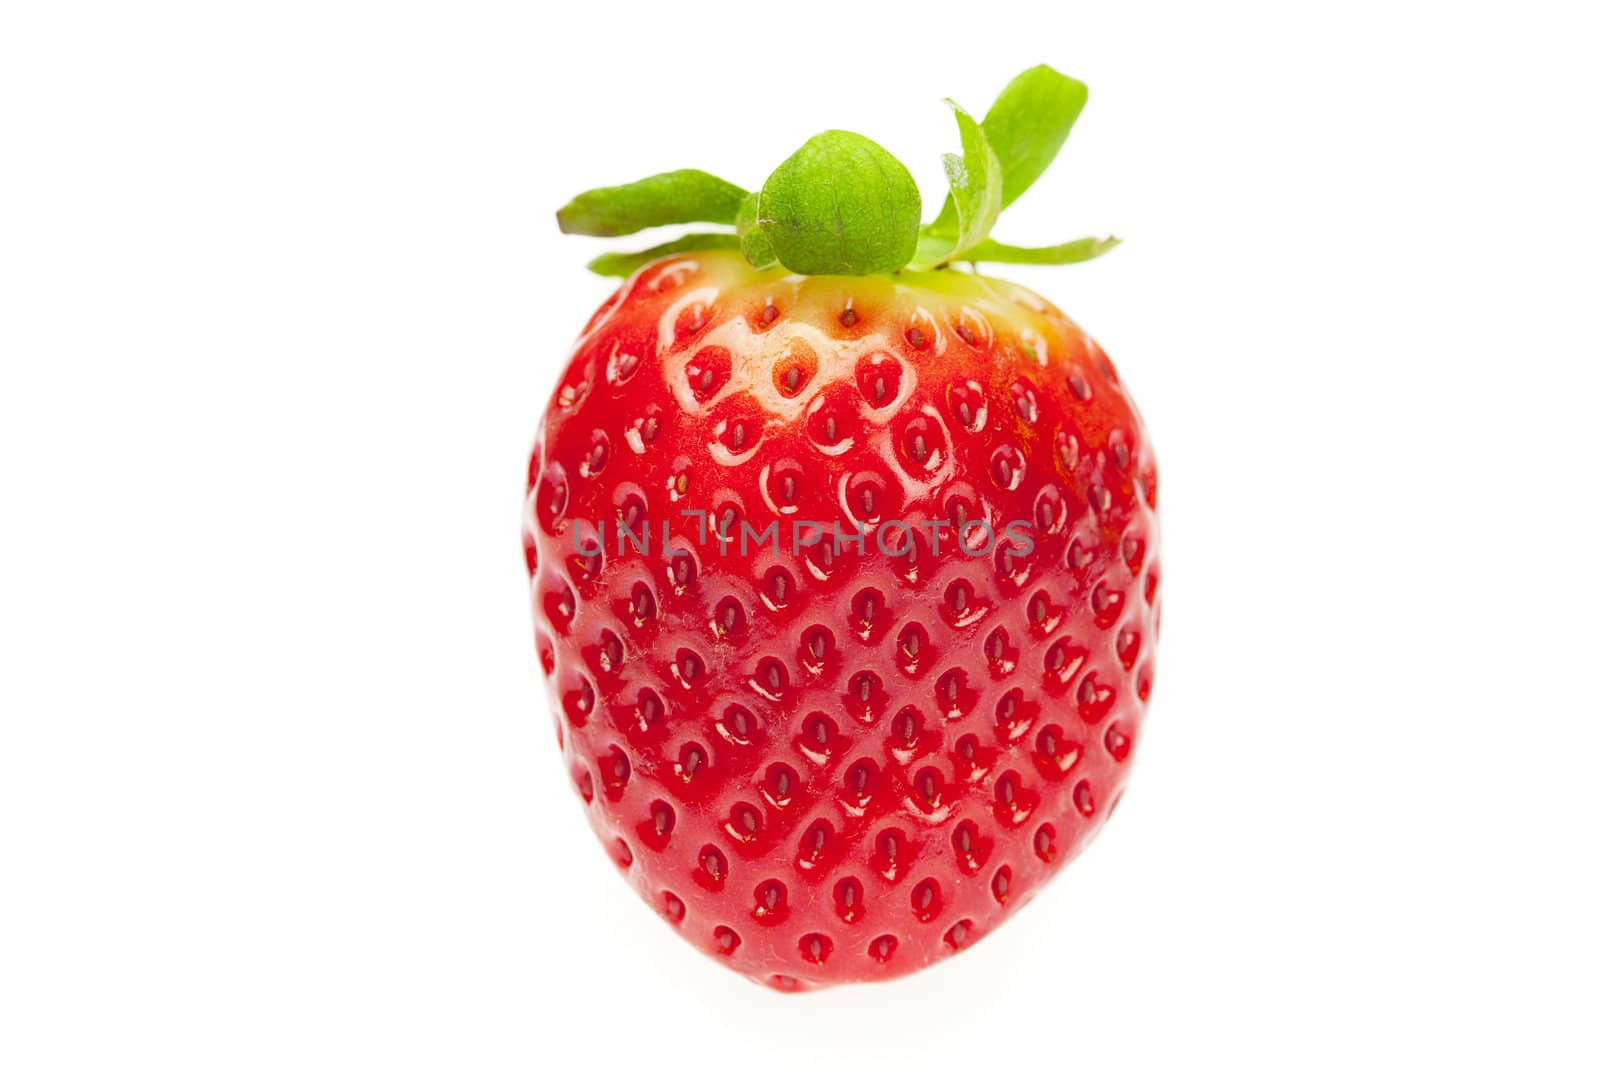 juicy strawberries isolated on white